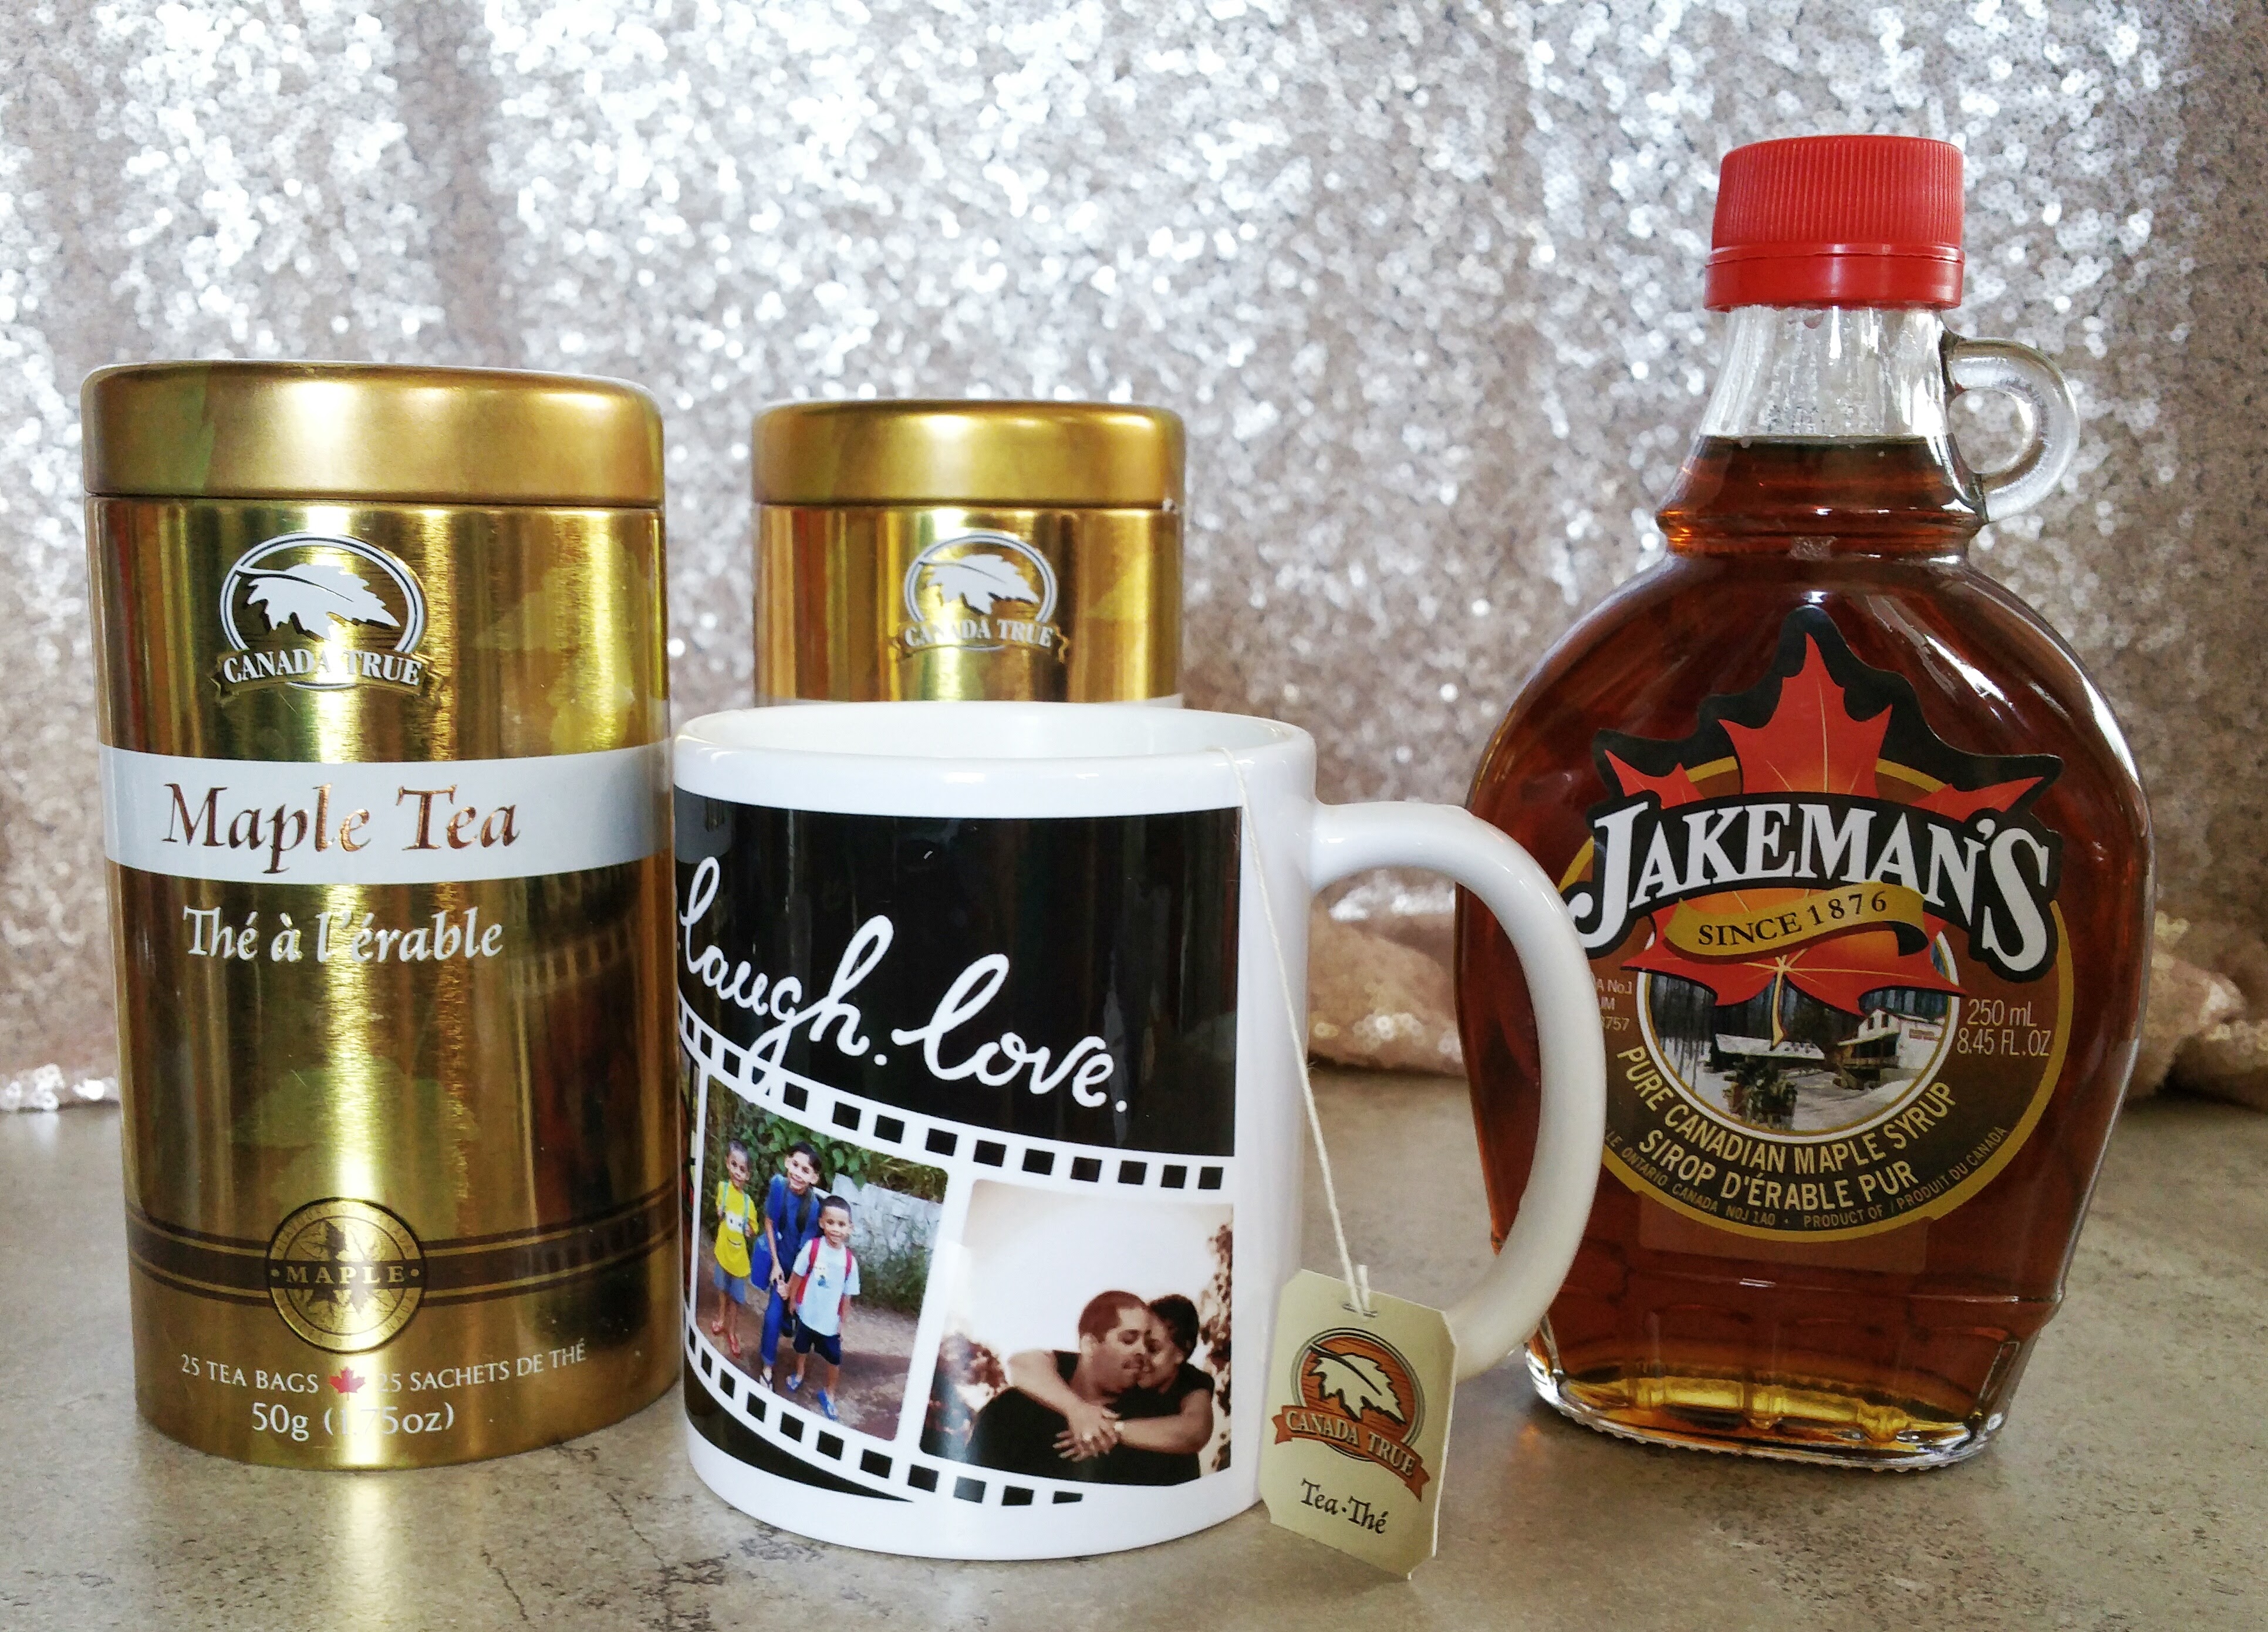 CanadaTheStore, Canada Day, celebrate, maple syrup, maple tea, canadian, canada, maple tea from canada, Jakeman's maple syrup, food, review, delicious,